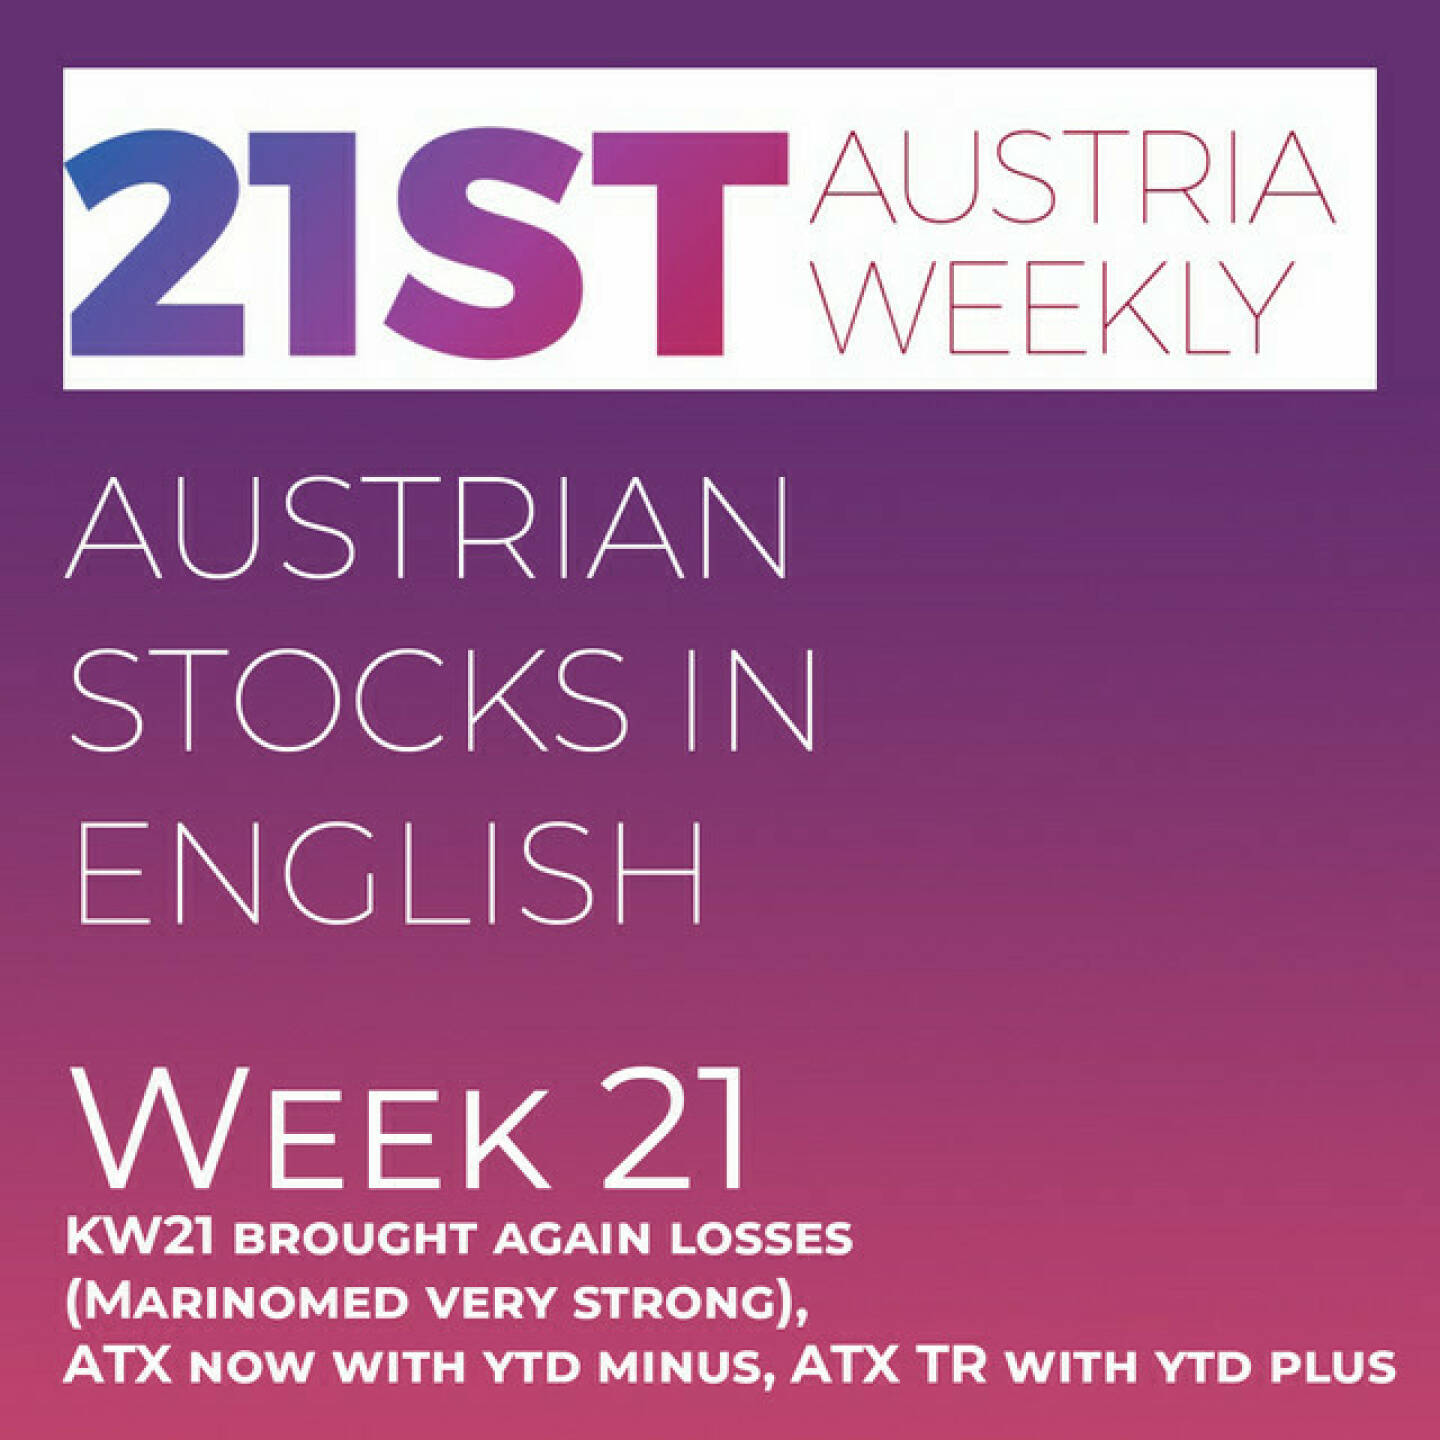 https://open.spotify.com/episode/4KKl5EyWvTmC0L157flQTA
Austrian Stocks in English: KW21 brought again losses (Marinomed very strong), ATX now with ytd minus, ATX TR with ytd plus - <p>Welcome  to &#34;Austrian Stocks in English - presented by Palfinger&#34;, the english spoken weekly Summary for the Austrian Stock Market,  positioned every Sunday in the mostly german languaged Podcast &#34;Audio-CD.at Indie Podcasts&#34;- Wiener Börse, Sport Musik und Mehr“ .<br/><br/>The following script is based on our 21st Austria weekly and week 21 was another lower week for ATX TR, which lost -2.24 percent. ATX TR is now year to date at 1,85 percent plus, while the ATX without dividends has a loss of 1,18 percent year to date. Best performers came from the second row: Marinomed gained 19 percent. News came from Palfinger, Marinomed, Zumtobel, CA Immo (2), SBO, Porr, Lenzing, EVN, UBM, Immofinanz, S Immo and Uniqa,, spoken by the absolutely smart Alison. <br/><br/><a href=https://boerse-social.com/21staustria target=_blank>https://boerse-social.com/21staustria</a><br/><br/>Please rate my Podcast on Apple Podcasts (or Spotify): <a href=https://podcasts.apple.com/at/podcast/audio-cd-at-indie-podcasts-wiener-boerse-sport-musik-und-mehr/id1484919130 target=_blank>https://podcasts.apple.com/at/podcast/audio-cd-at-indie-podcasts-wiener-boerse-sport-musik-und-mehr/id1484919130</a> .And please spread the word : <a href=https://www.boerse-social.com/21staustria target=_blank>https://www.boerse-social.com/21staustria</a> - the address to subscribe to the weekly summary as a PDF.</p>